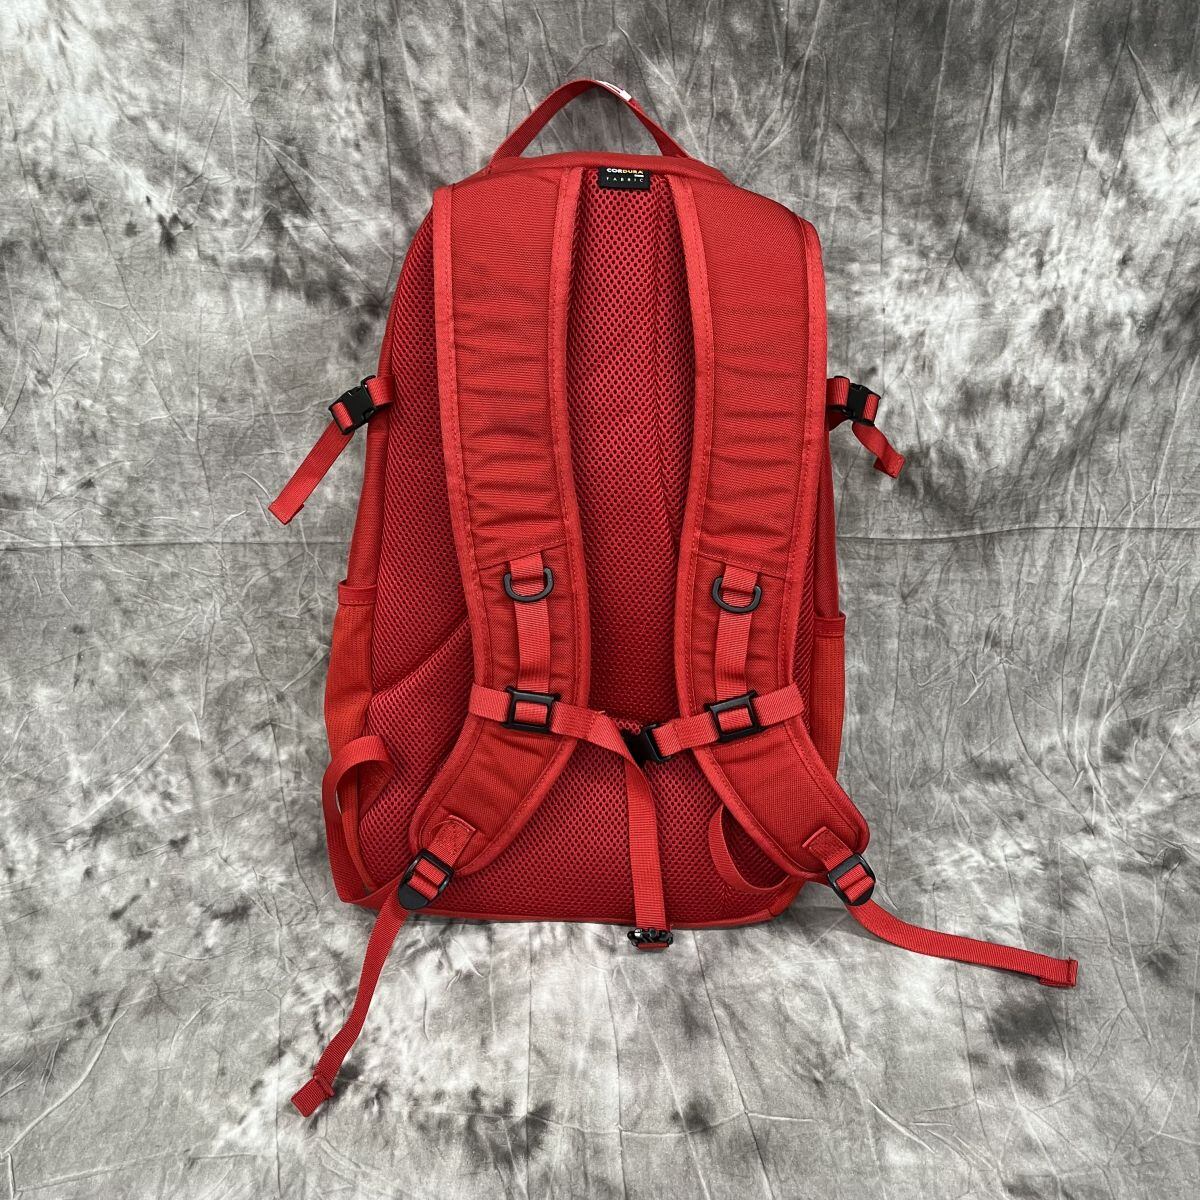 Supreme/シュプリーム【18SS】Backpack/バックパック/リュックサック ...